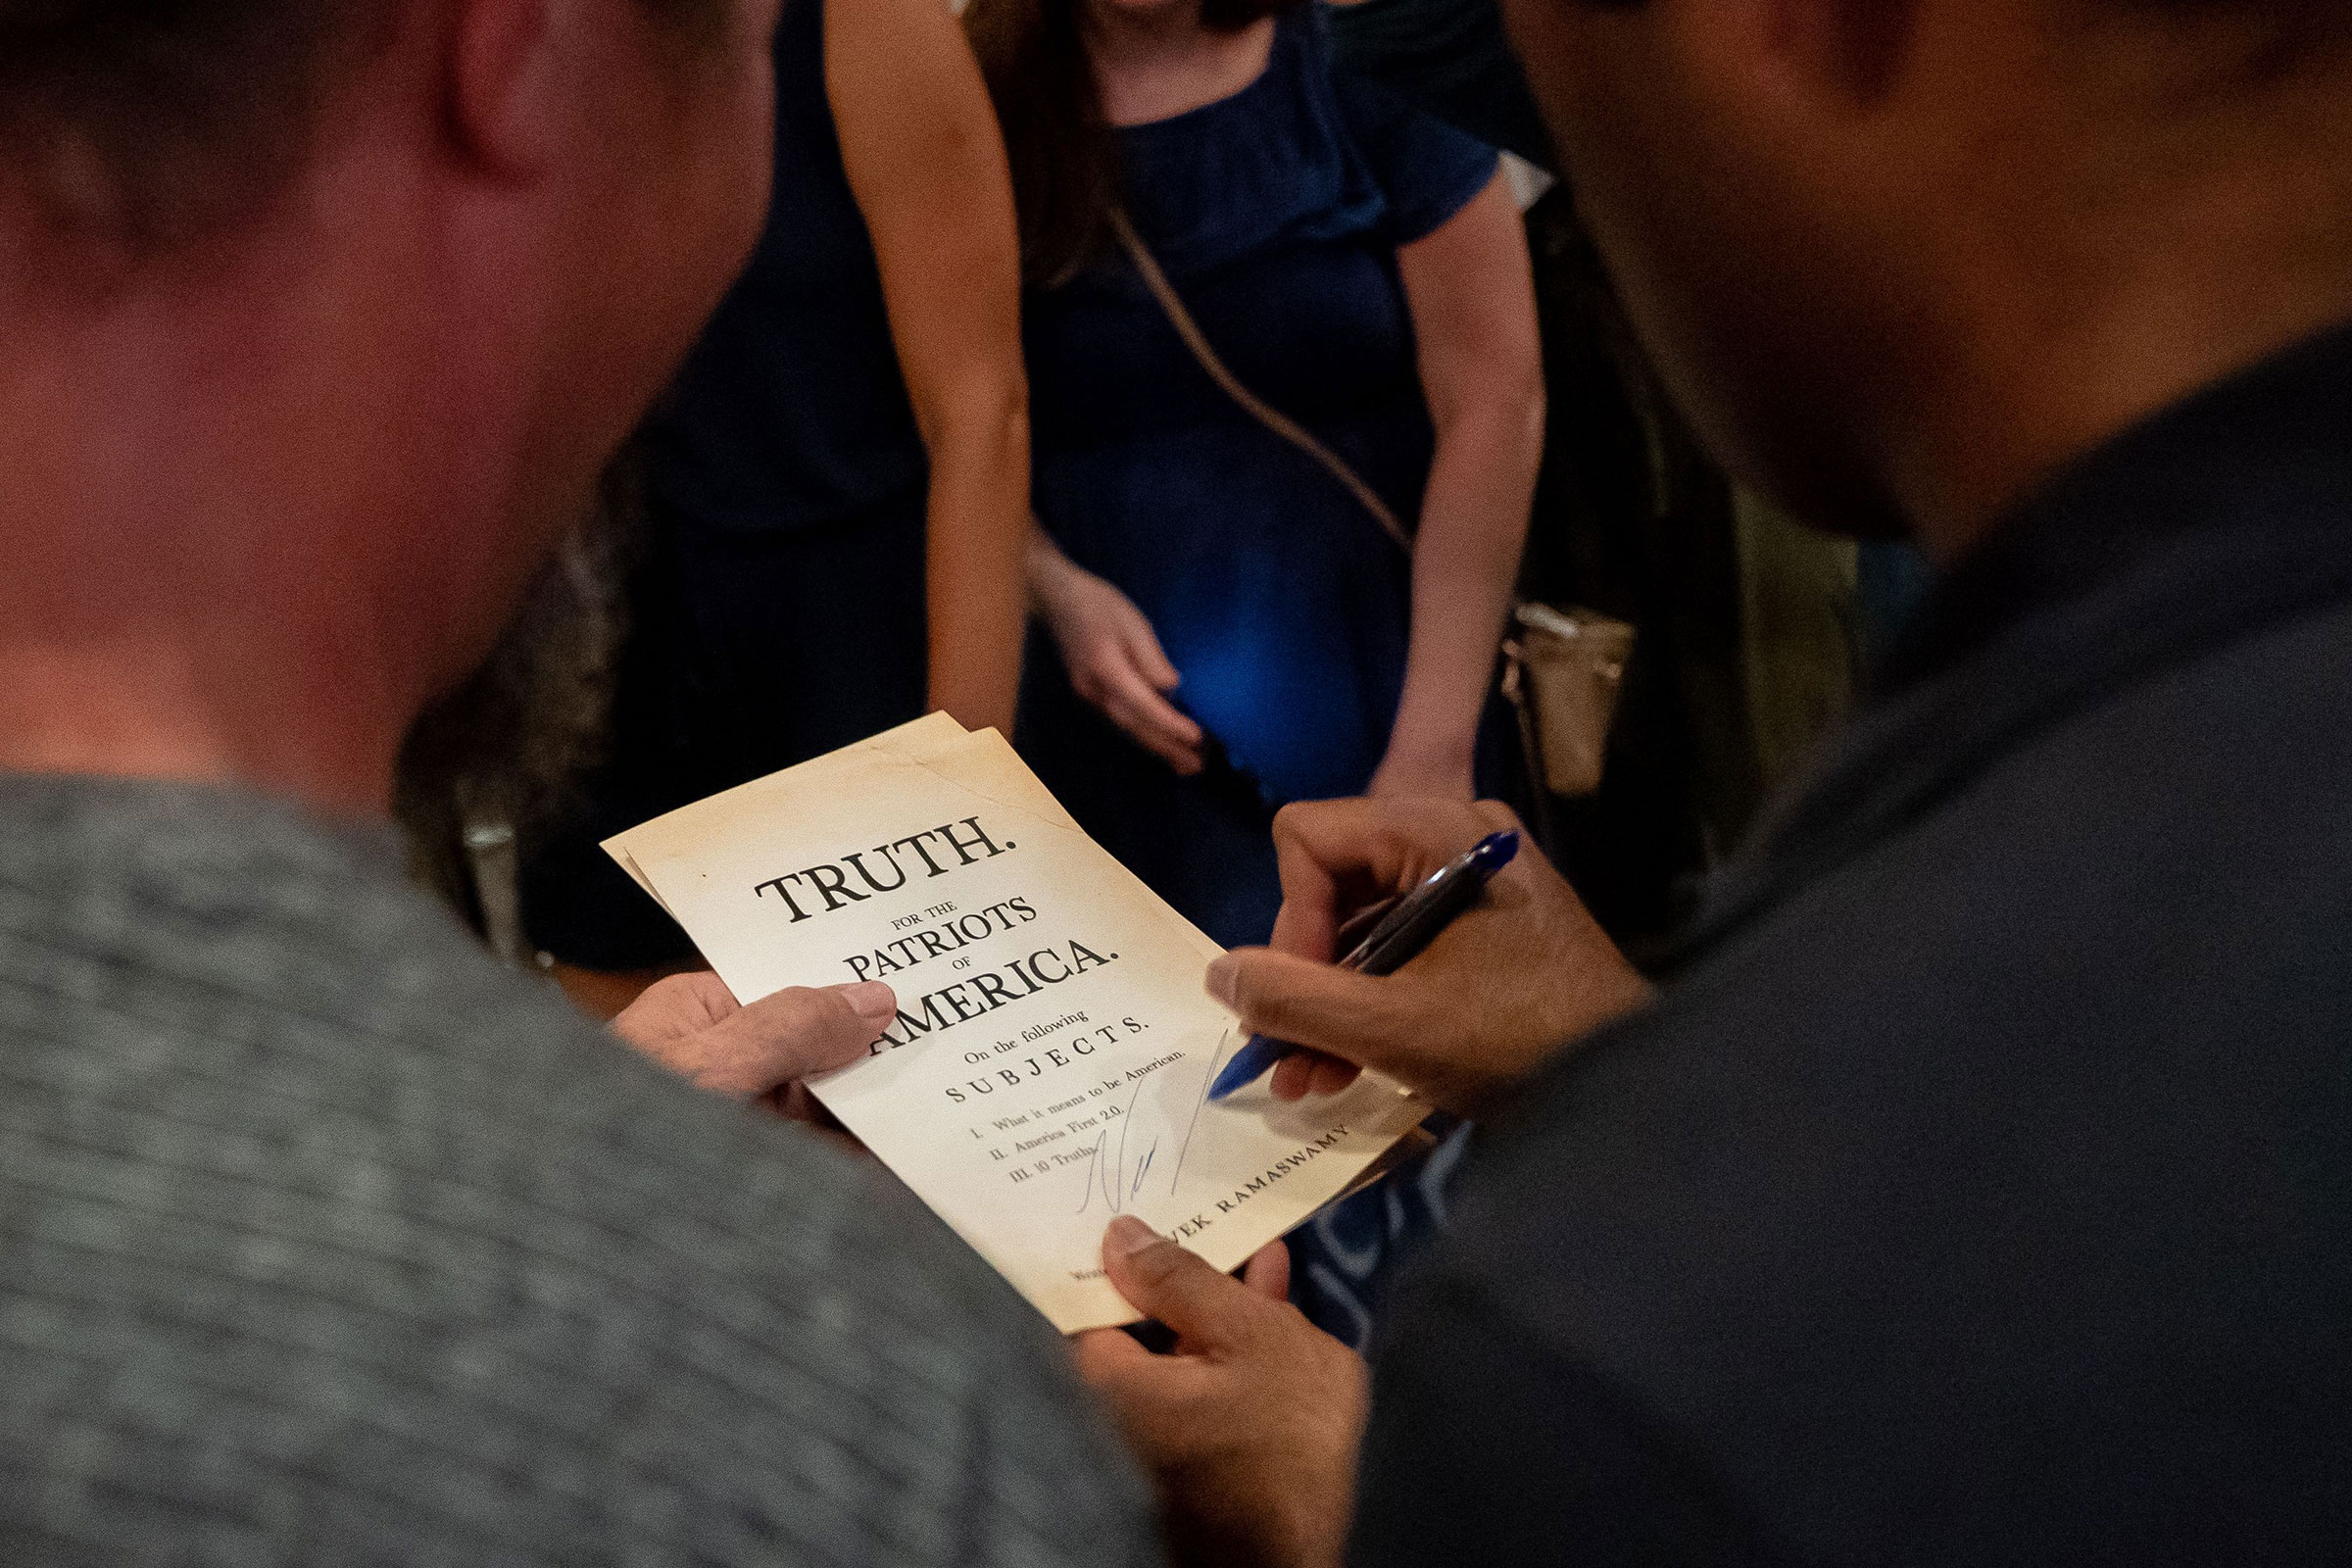 Ramaswamy signs a pamphlet with a pen that says "truth. for the patriots of america" on it